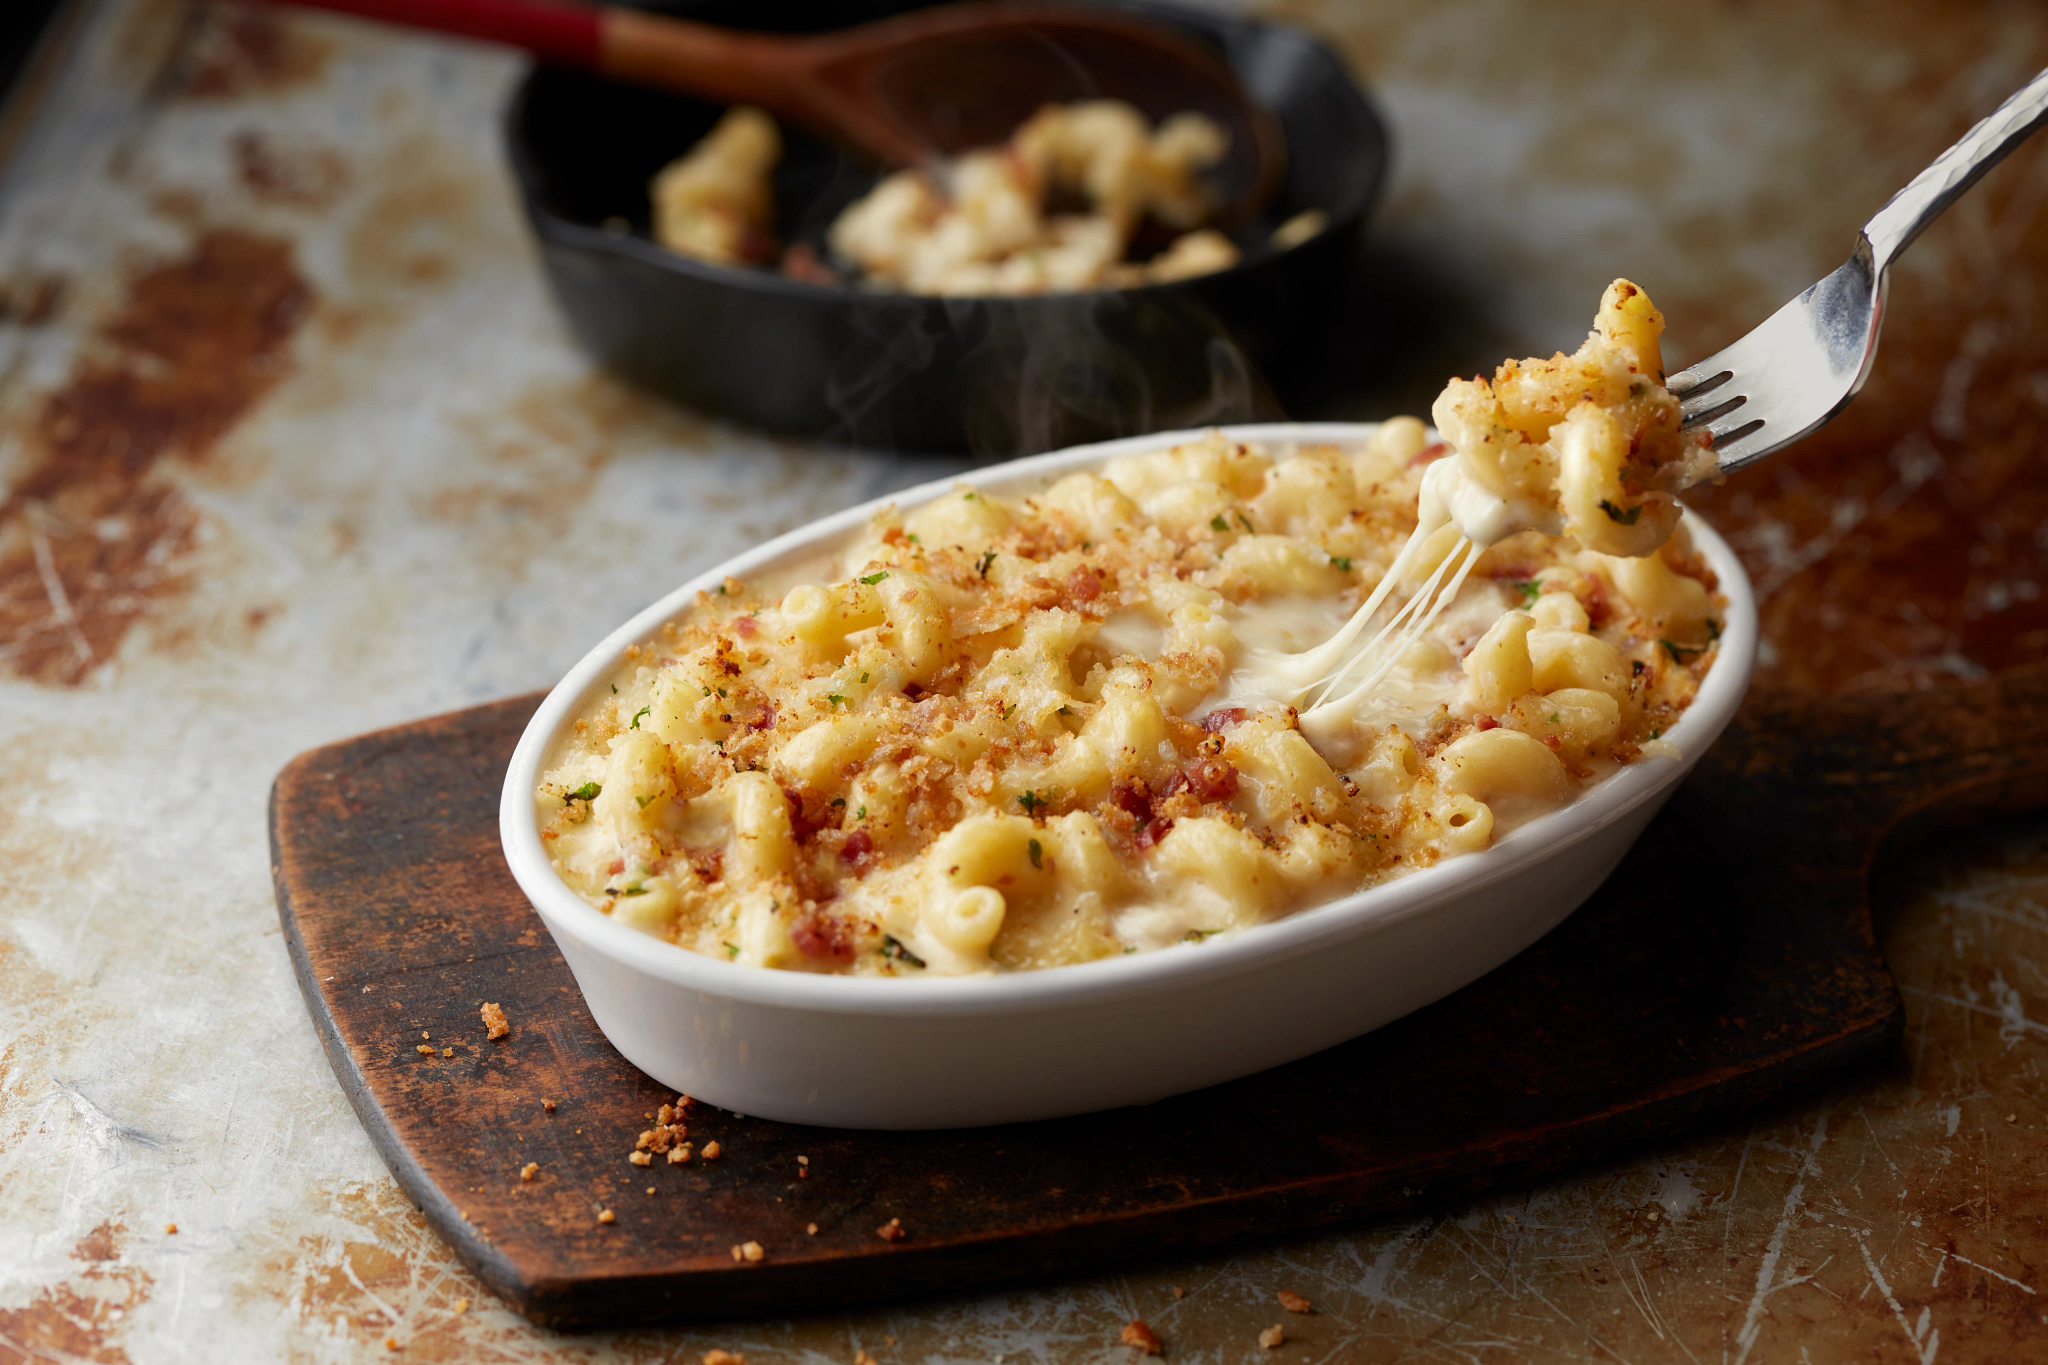 LongHorn's Steakhouse Mac & Cheese with applewood smoked bacon and four cheeses.